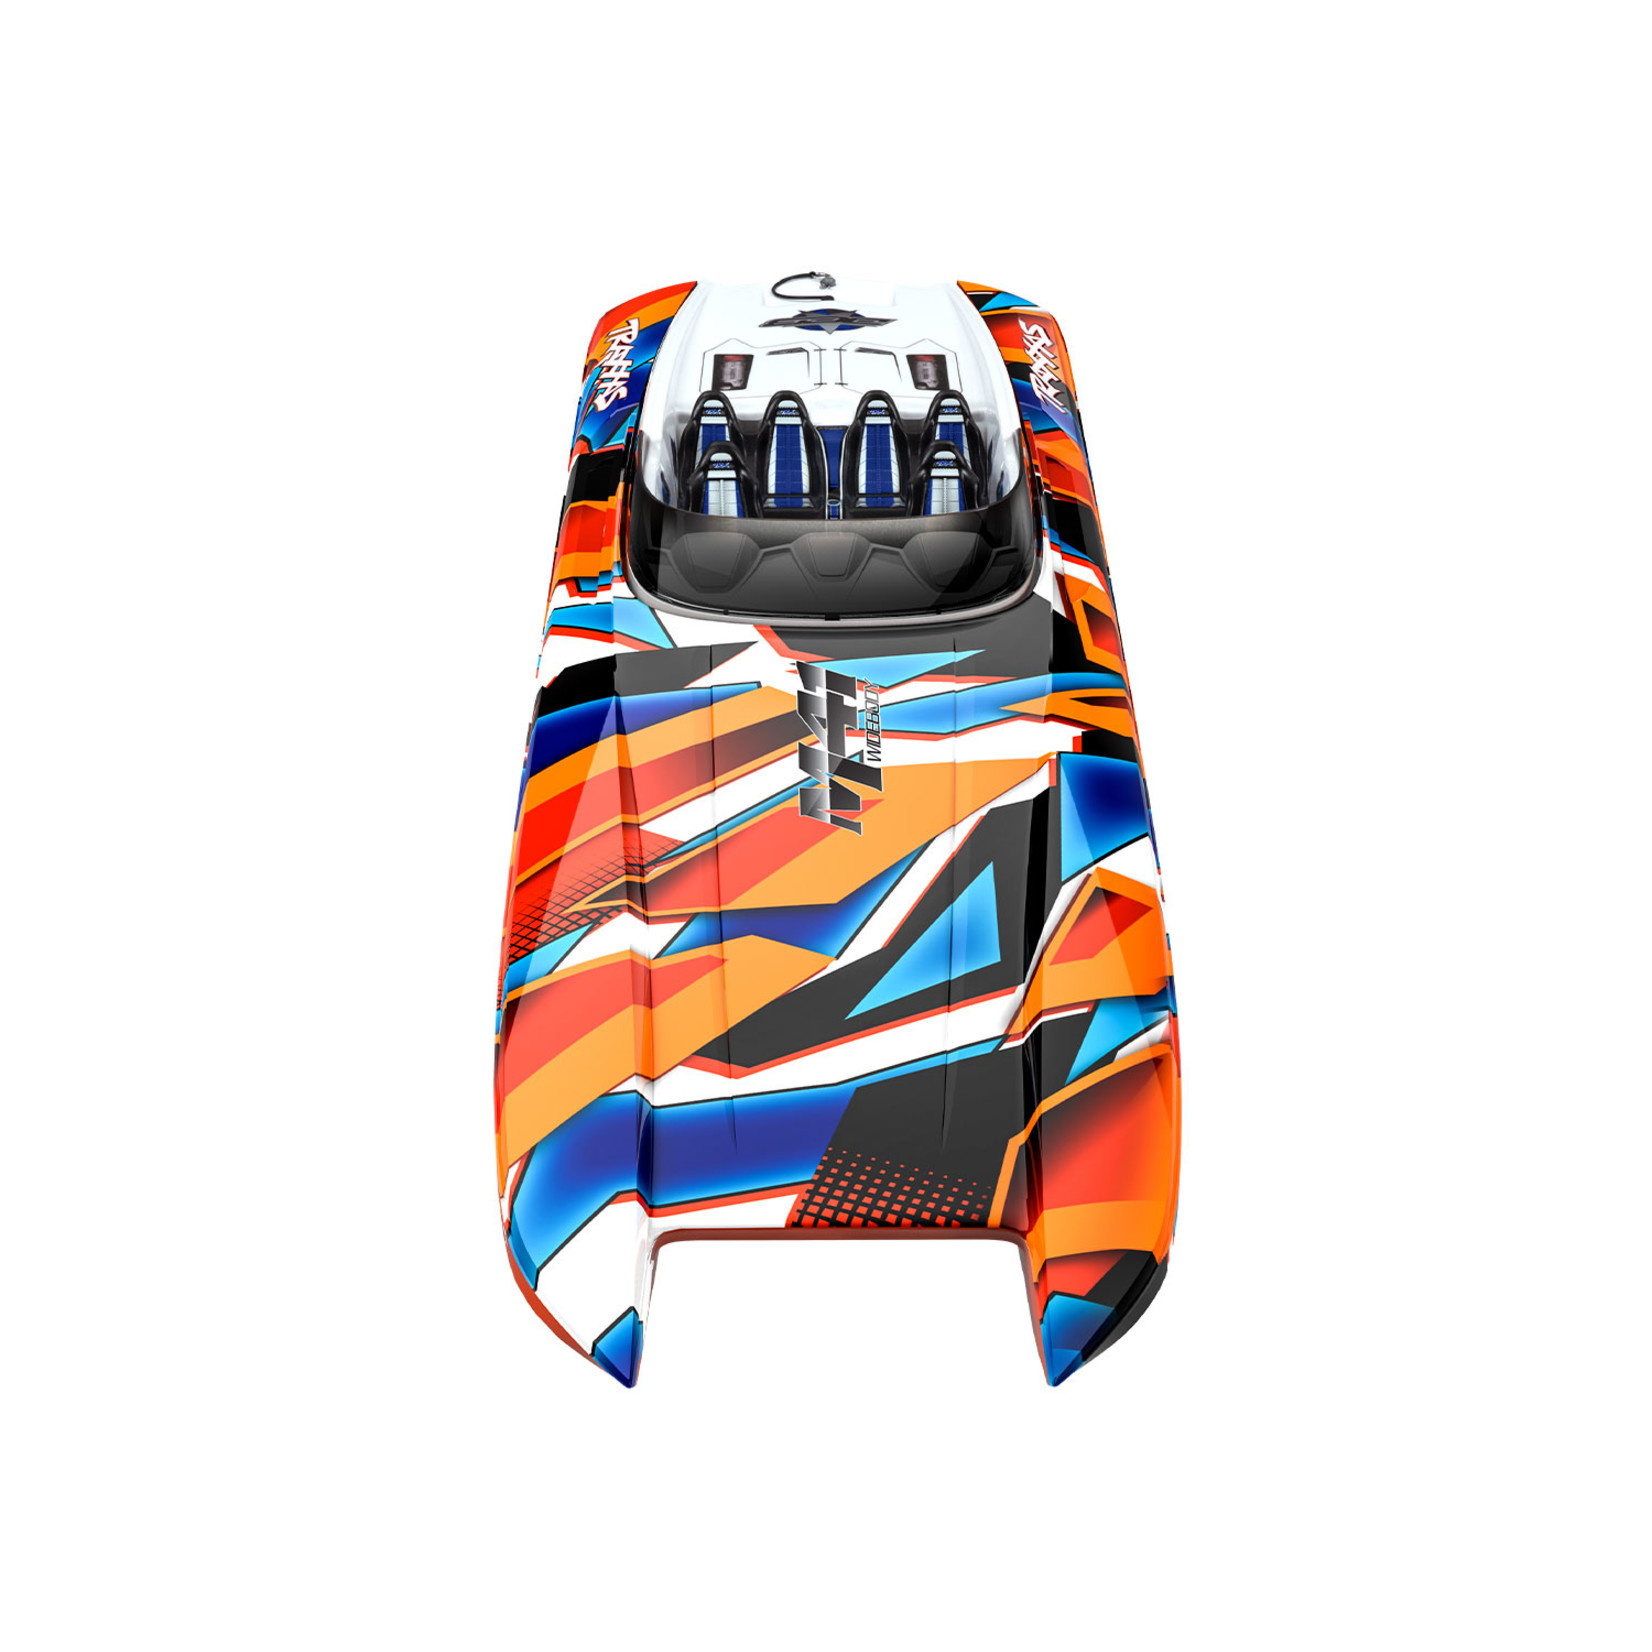 Traxxas 57046-4-ORNGR DCB M41 Widebody:  Brushless 40' Race Boat with TQi™ Traxxas Link™ Enabled 2.4GHz Radio System & Traxxas Stability Management (TSM)®